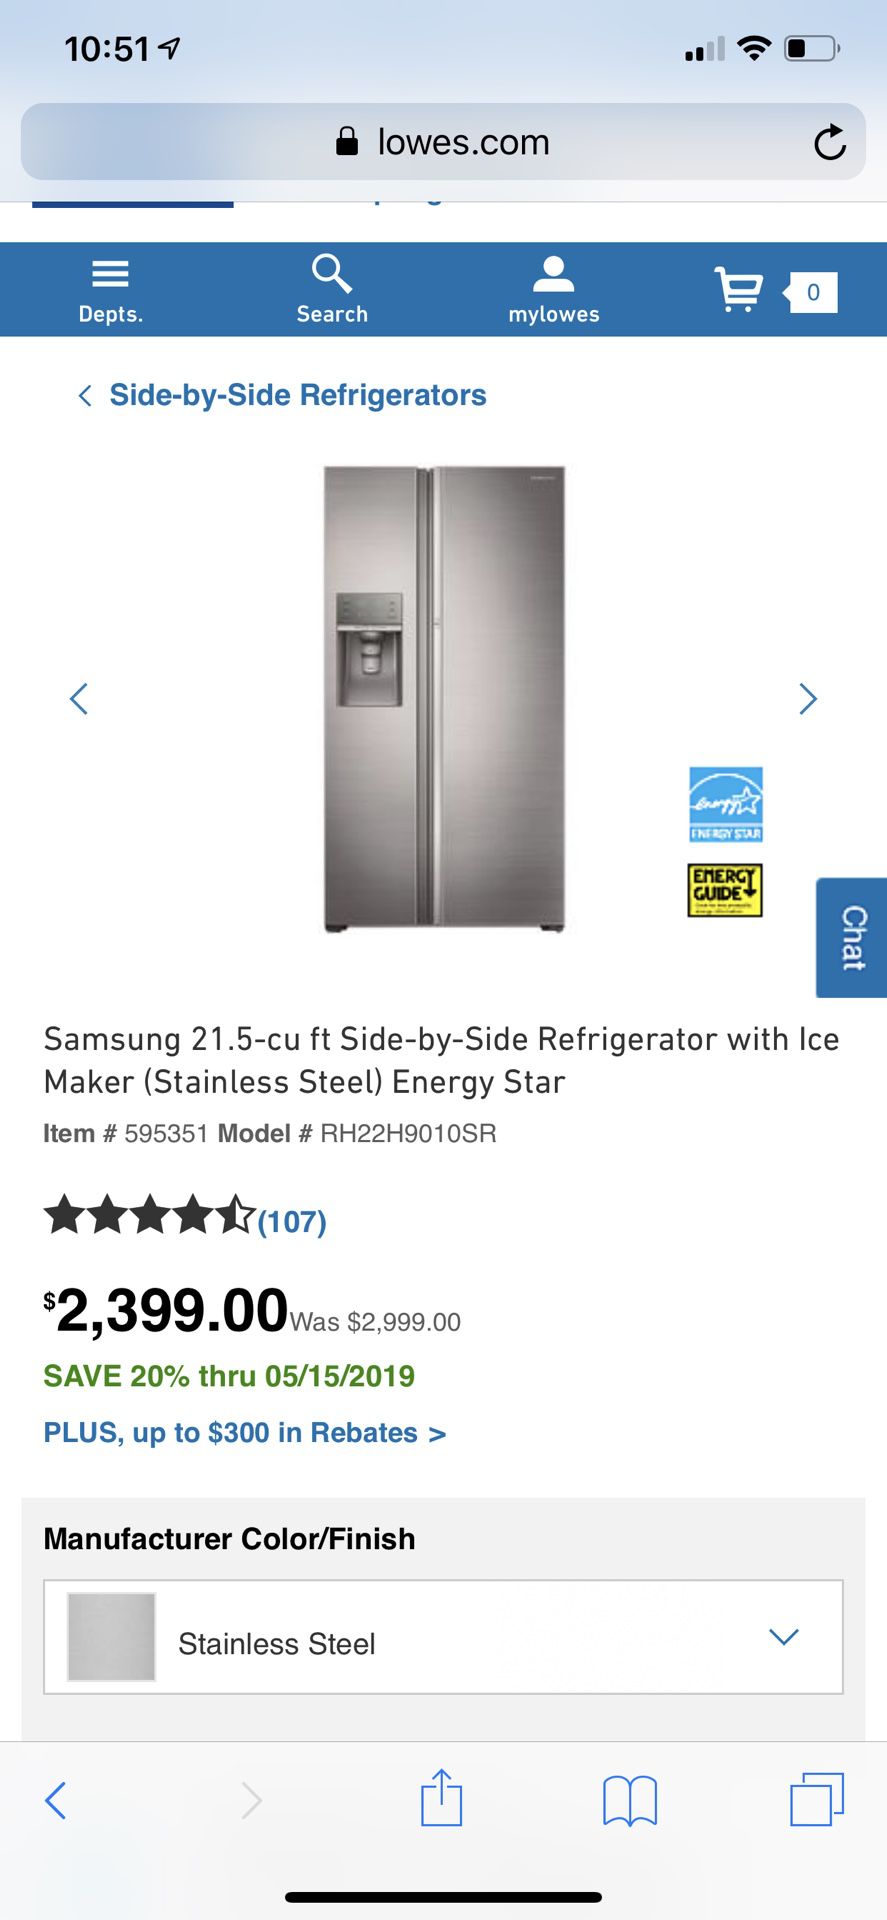 Samsung 21.5-cu ft Side-by-Side Refrigerator with Ice Maker (Stainless Steel) Energy Star Item # 595351 Model # RH22H9010SR